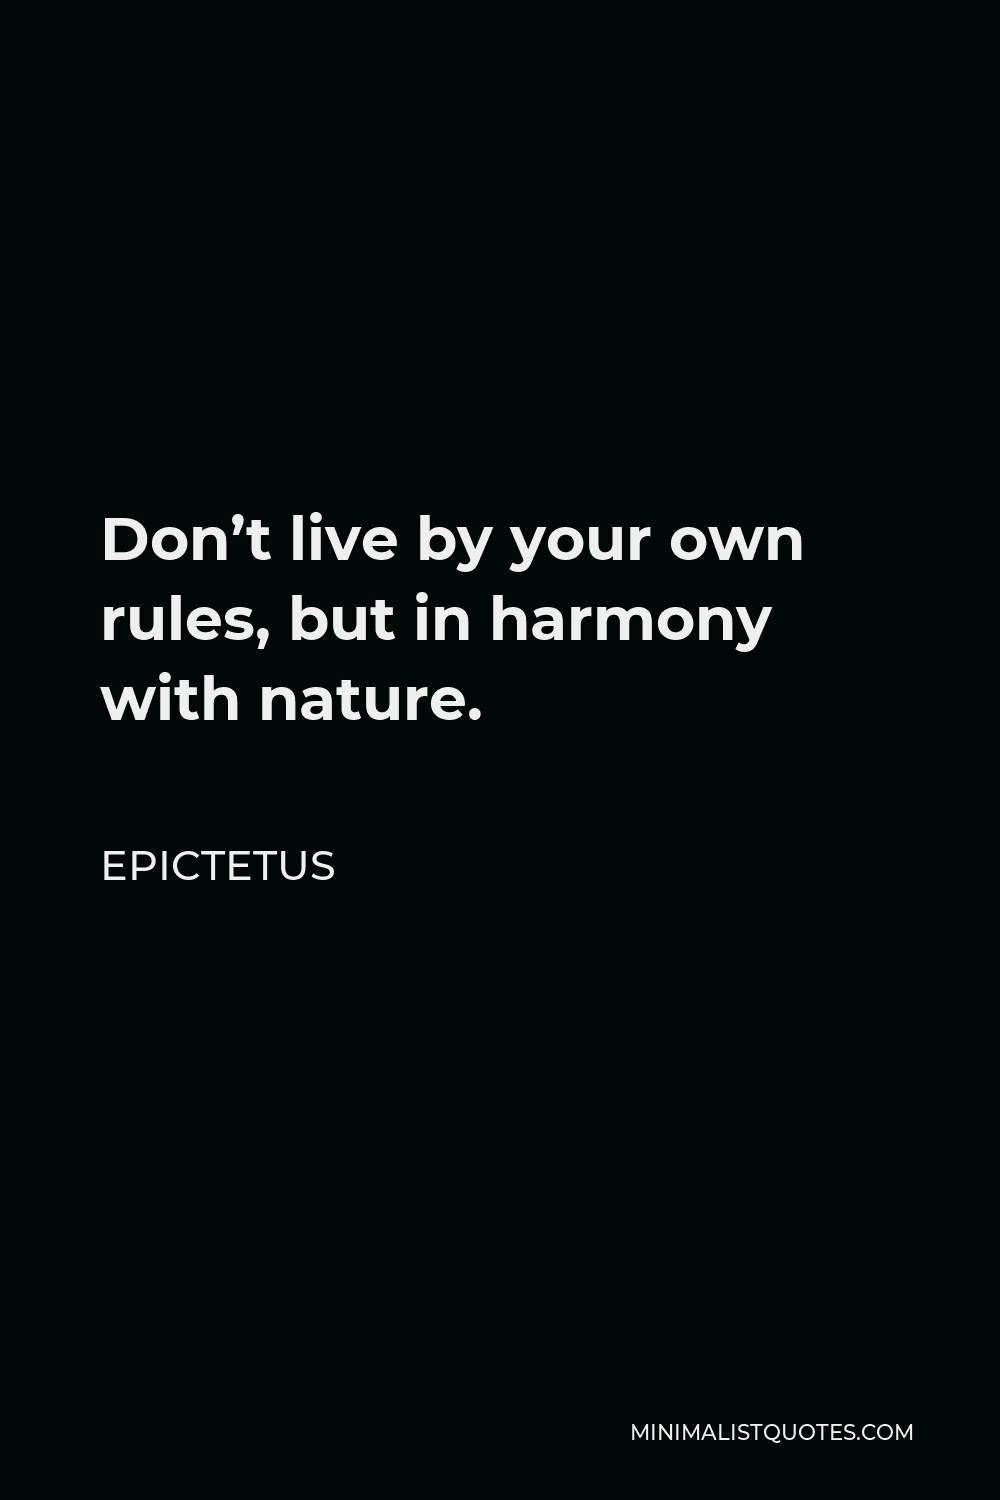 Epictetus Quote - Don’t live by your own rules, but in harmony with nature.